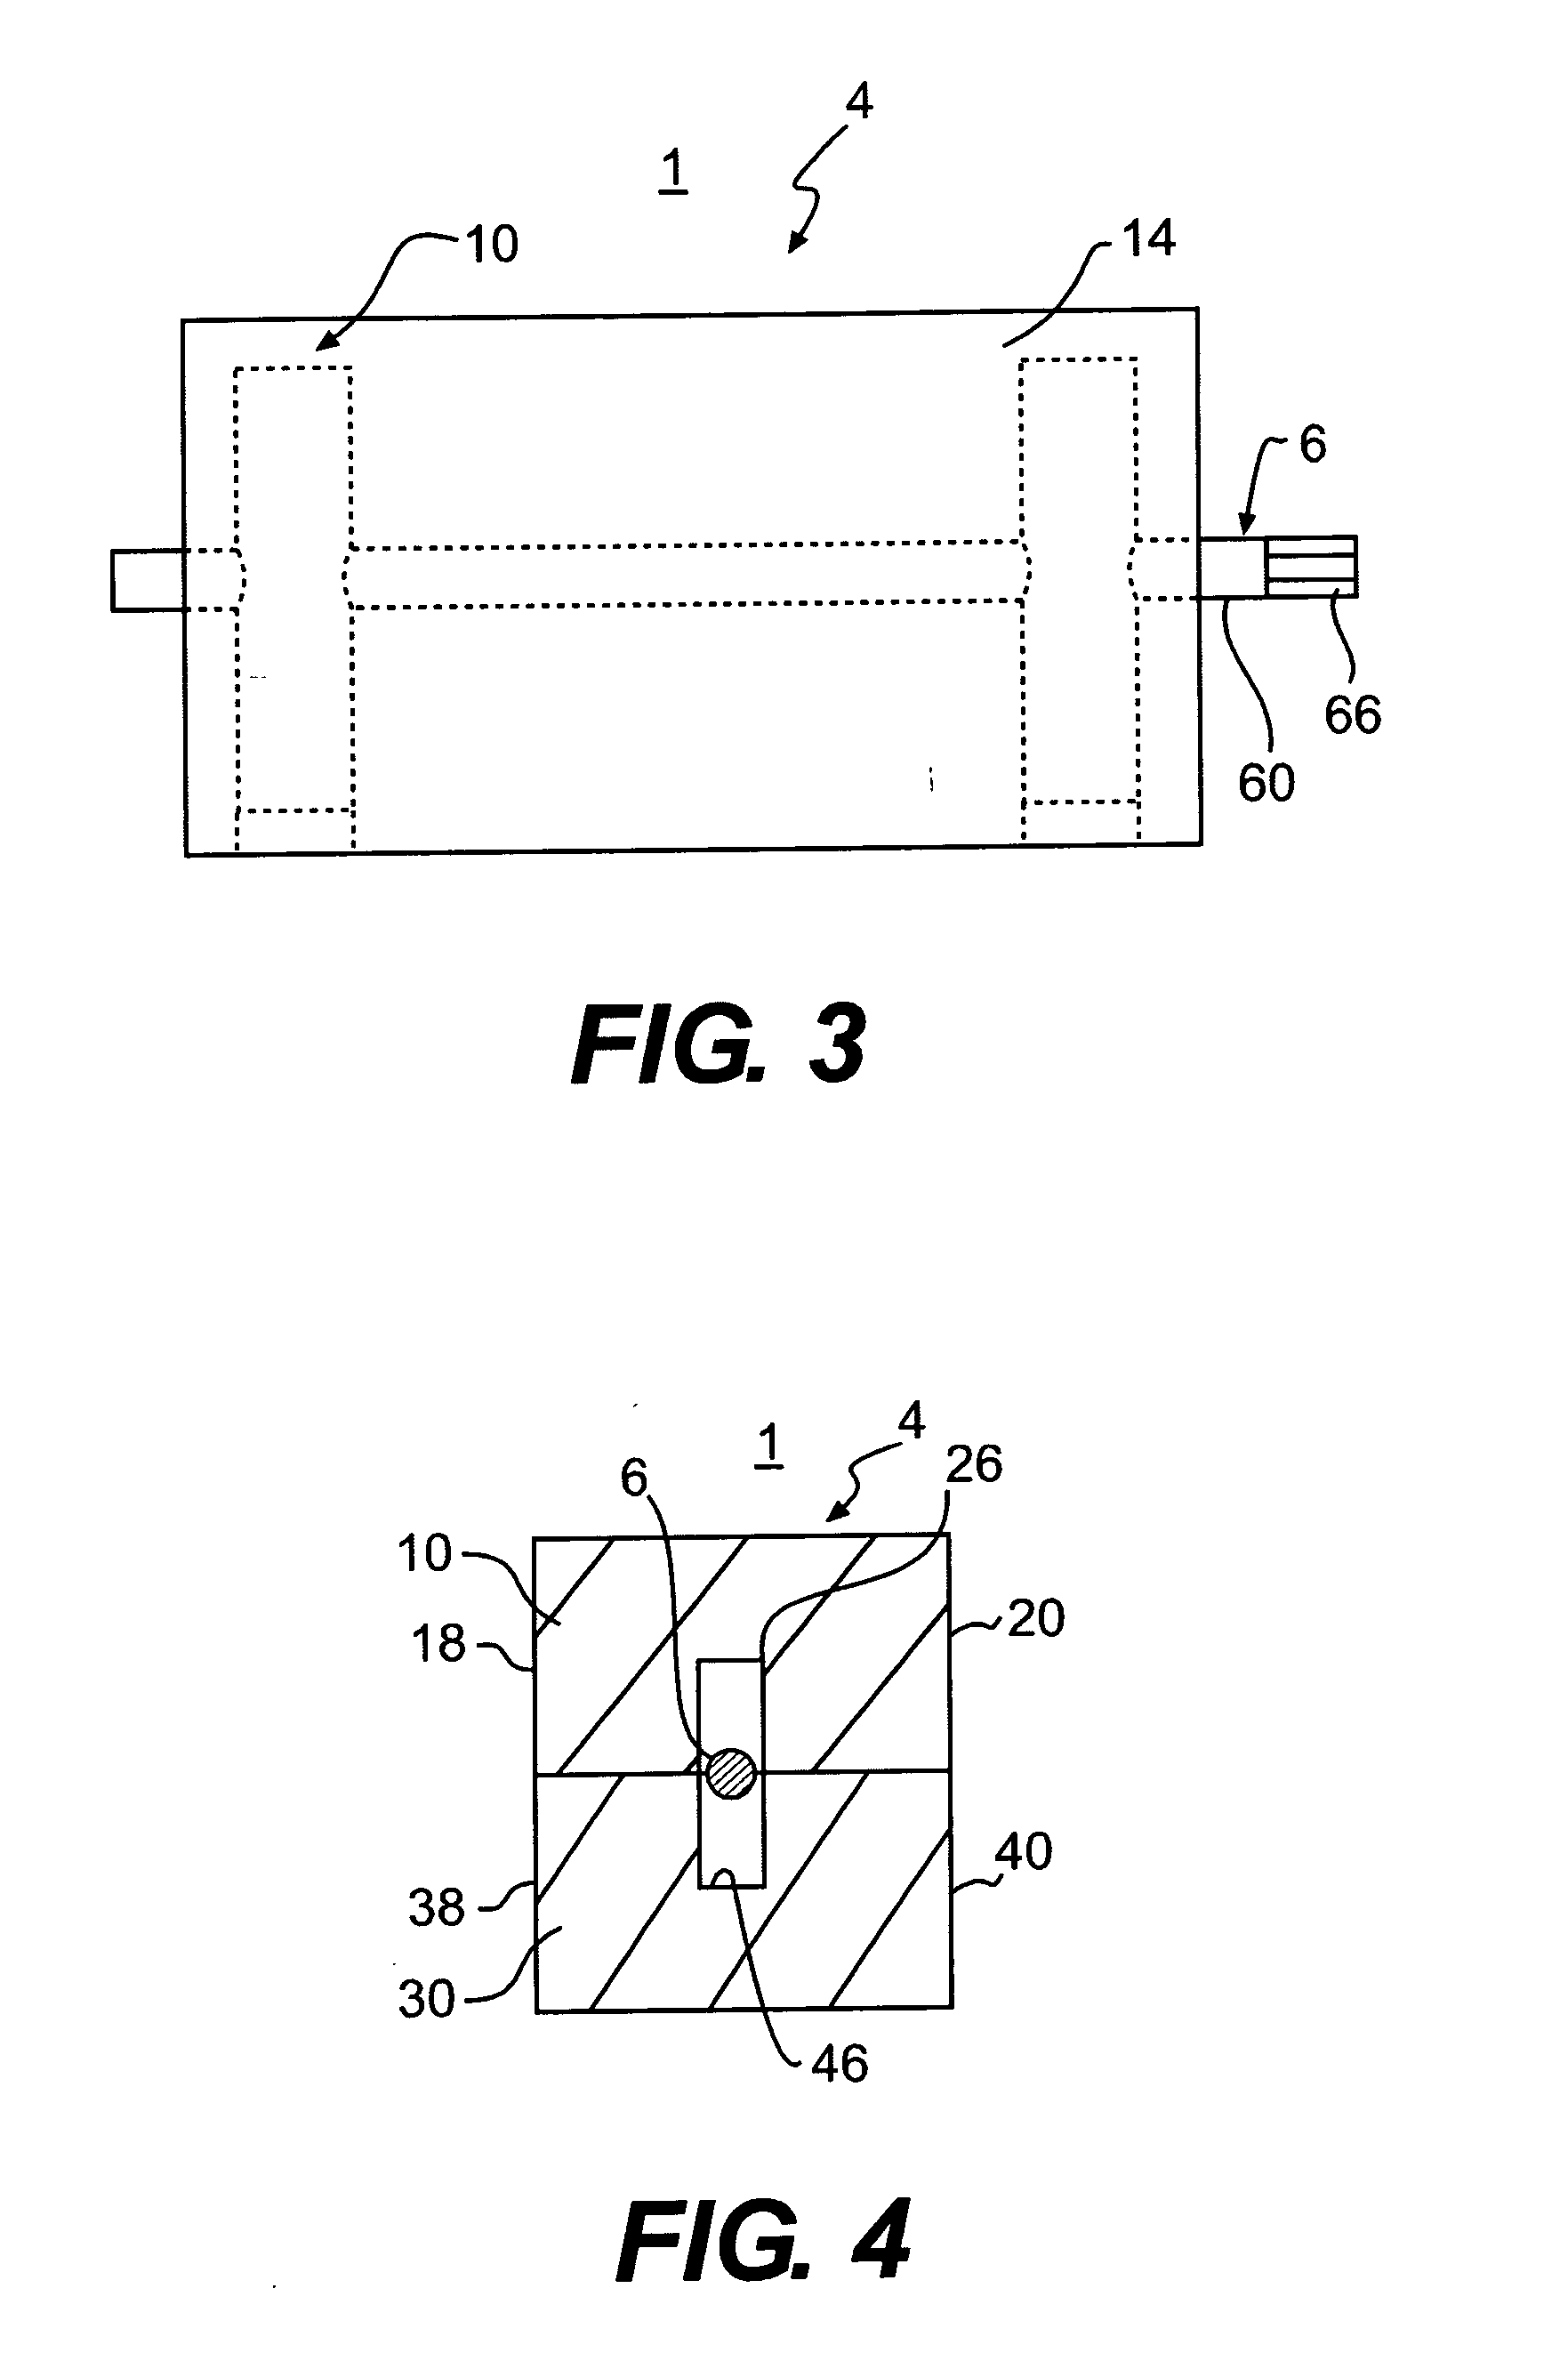 Universal adjustable spacer assembly